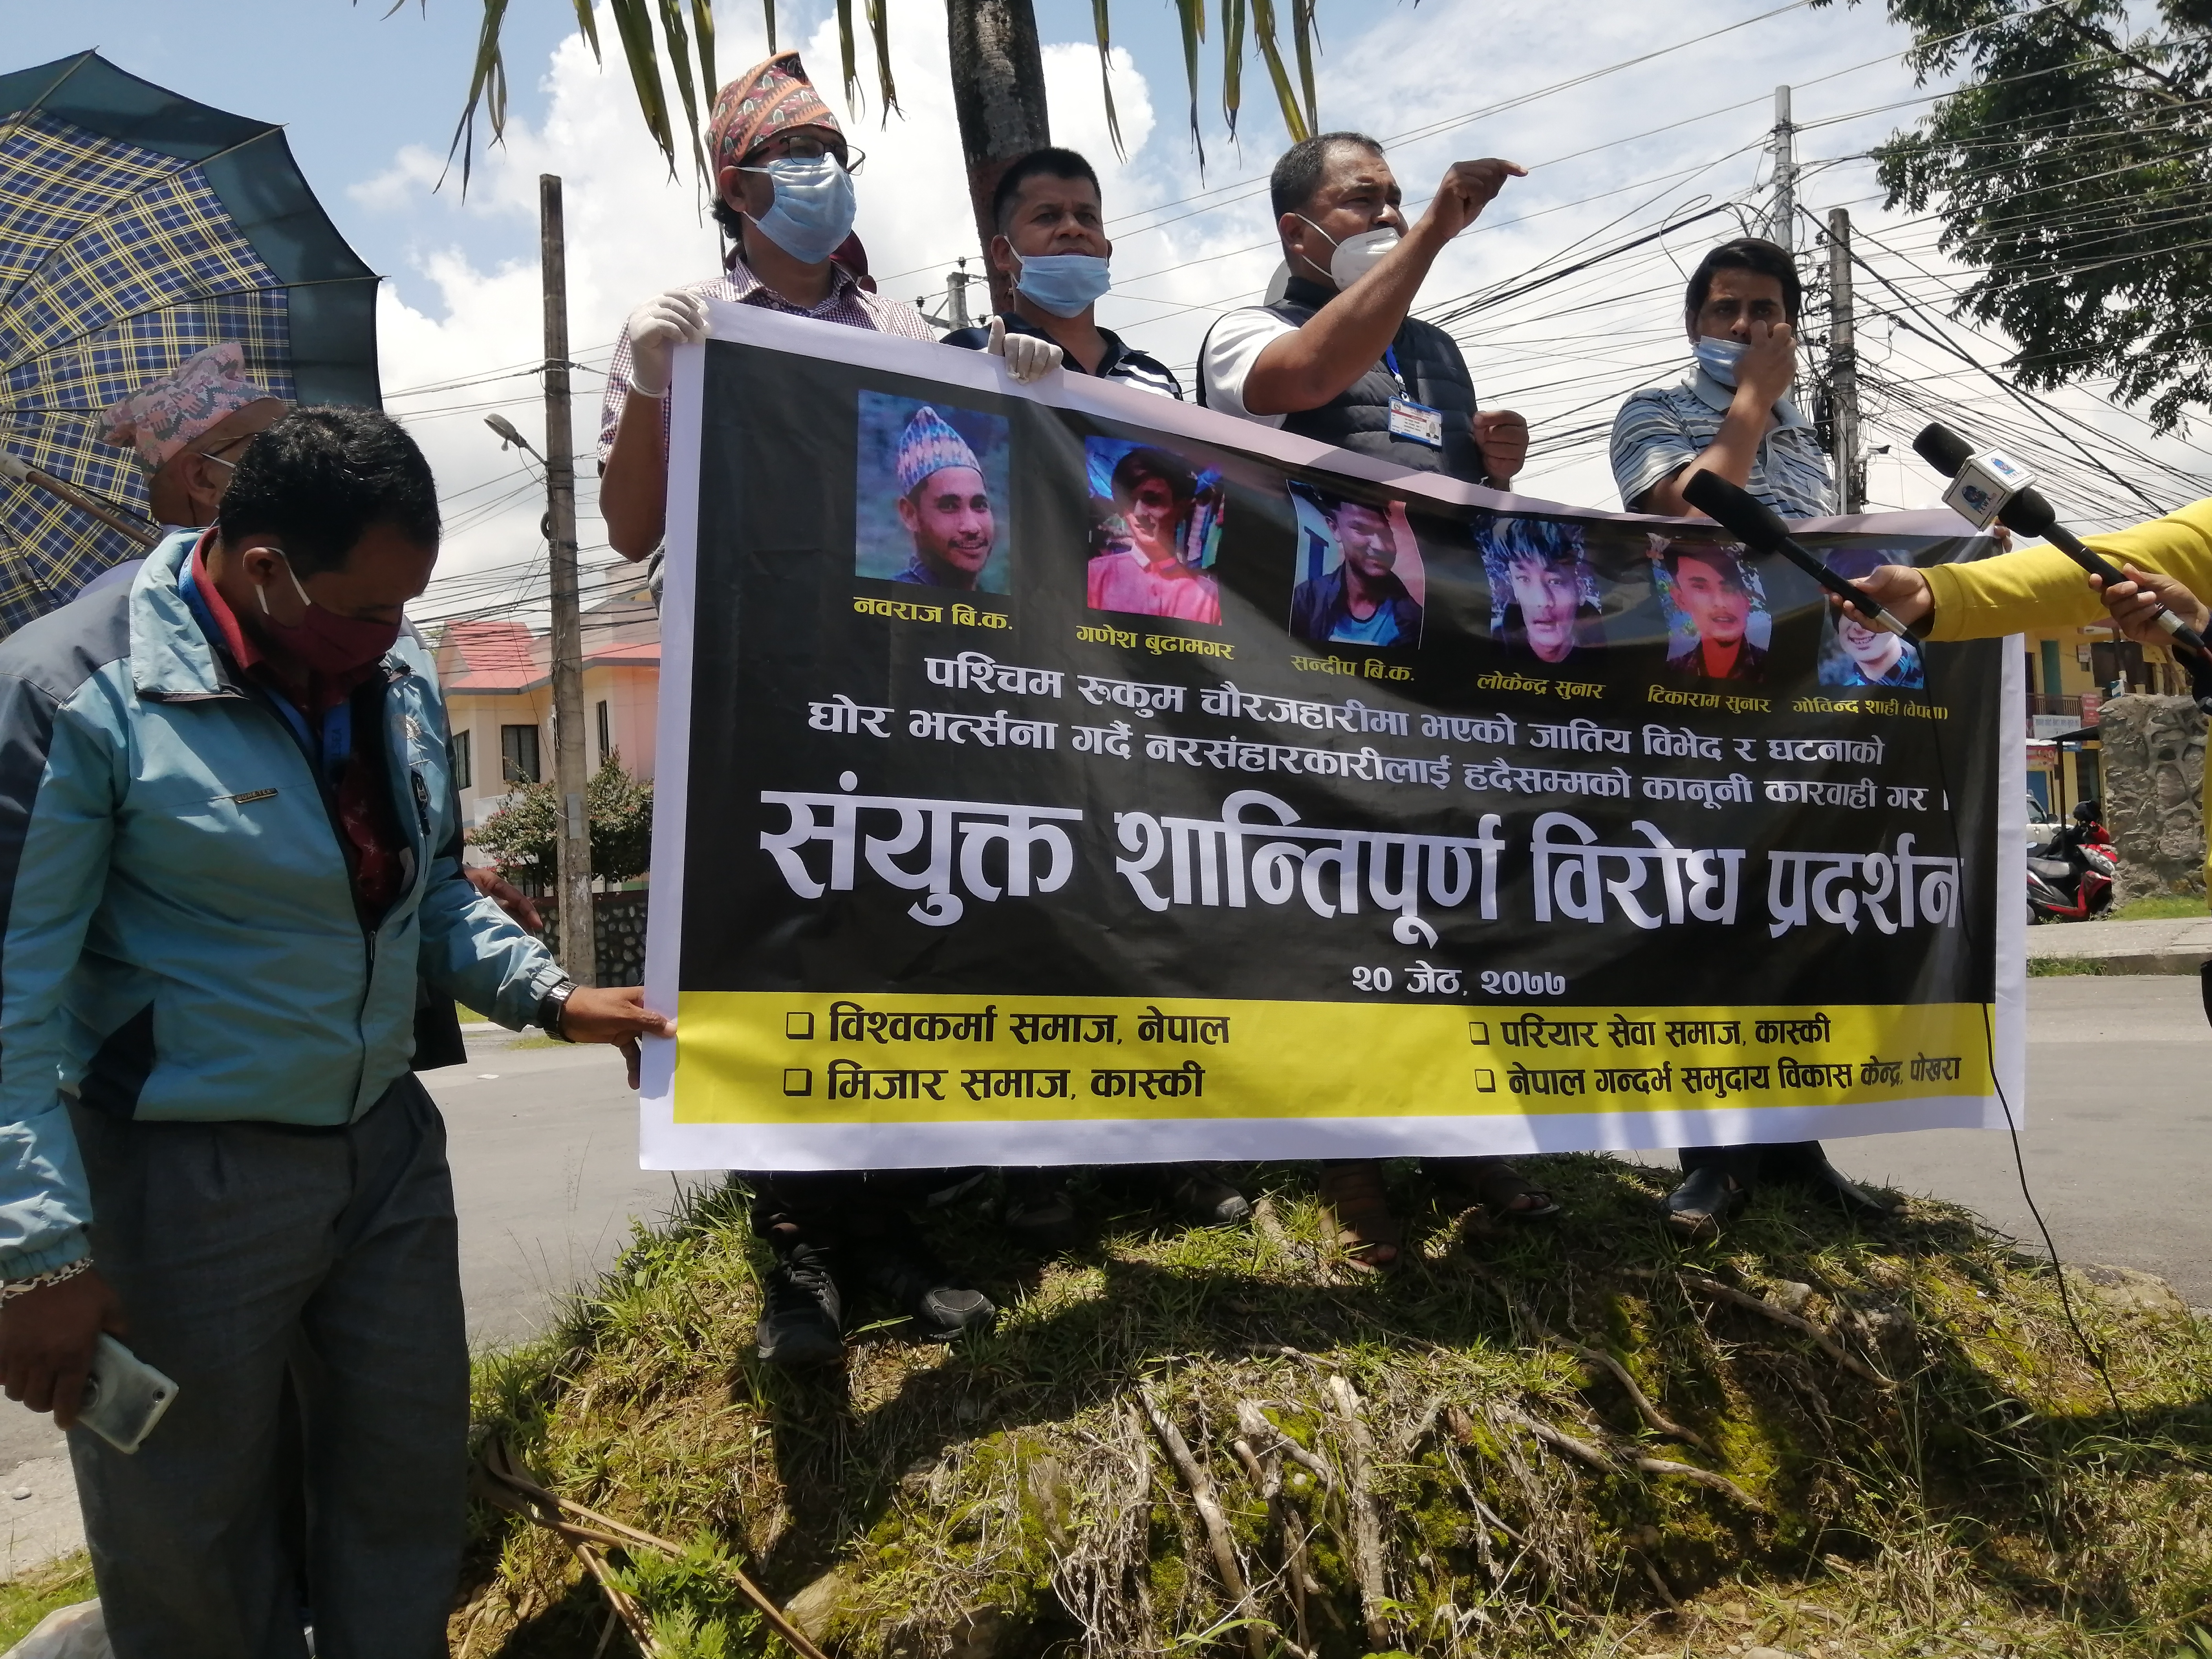 Rights activists from Dalit organisations stage a protest, in Pokhara on Tuesday, demanding justice against the caste-based violence which was witnessed in Chaurjahari, Rukum west. Photo: Rishi Baral/THT 